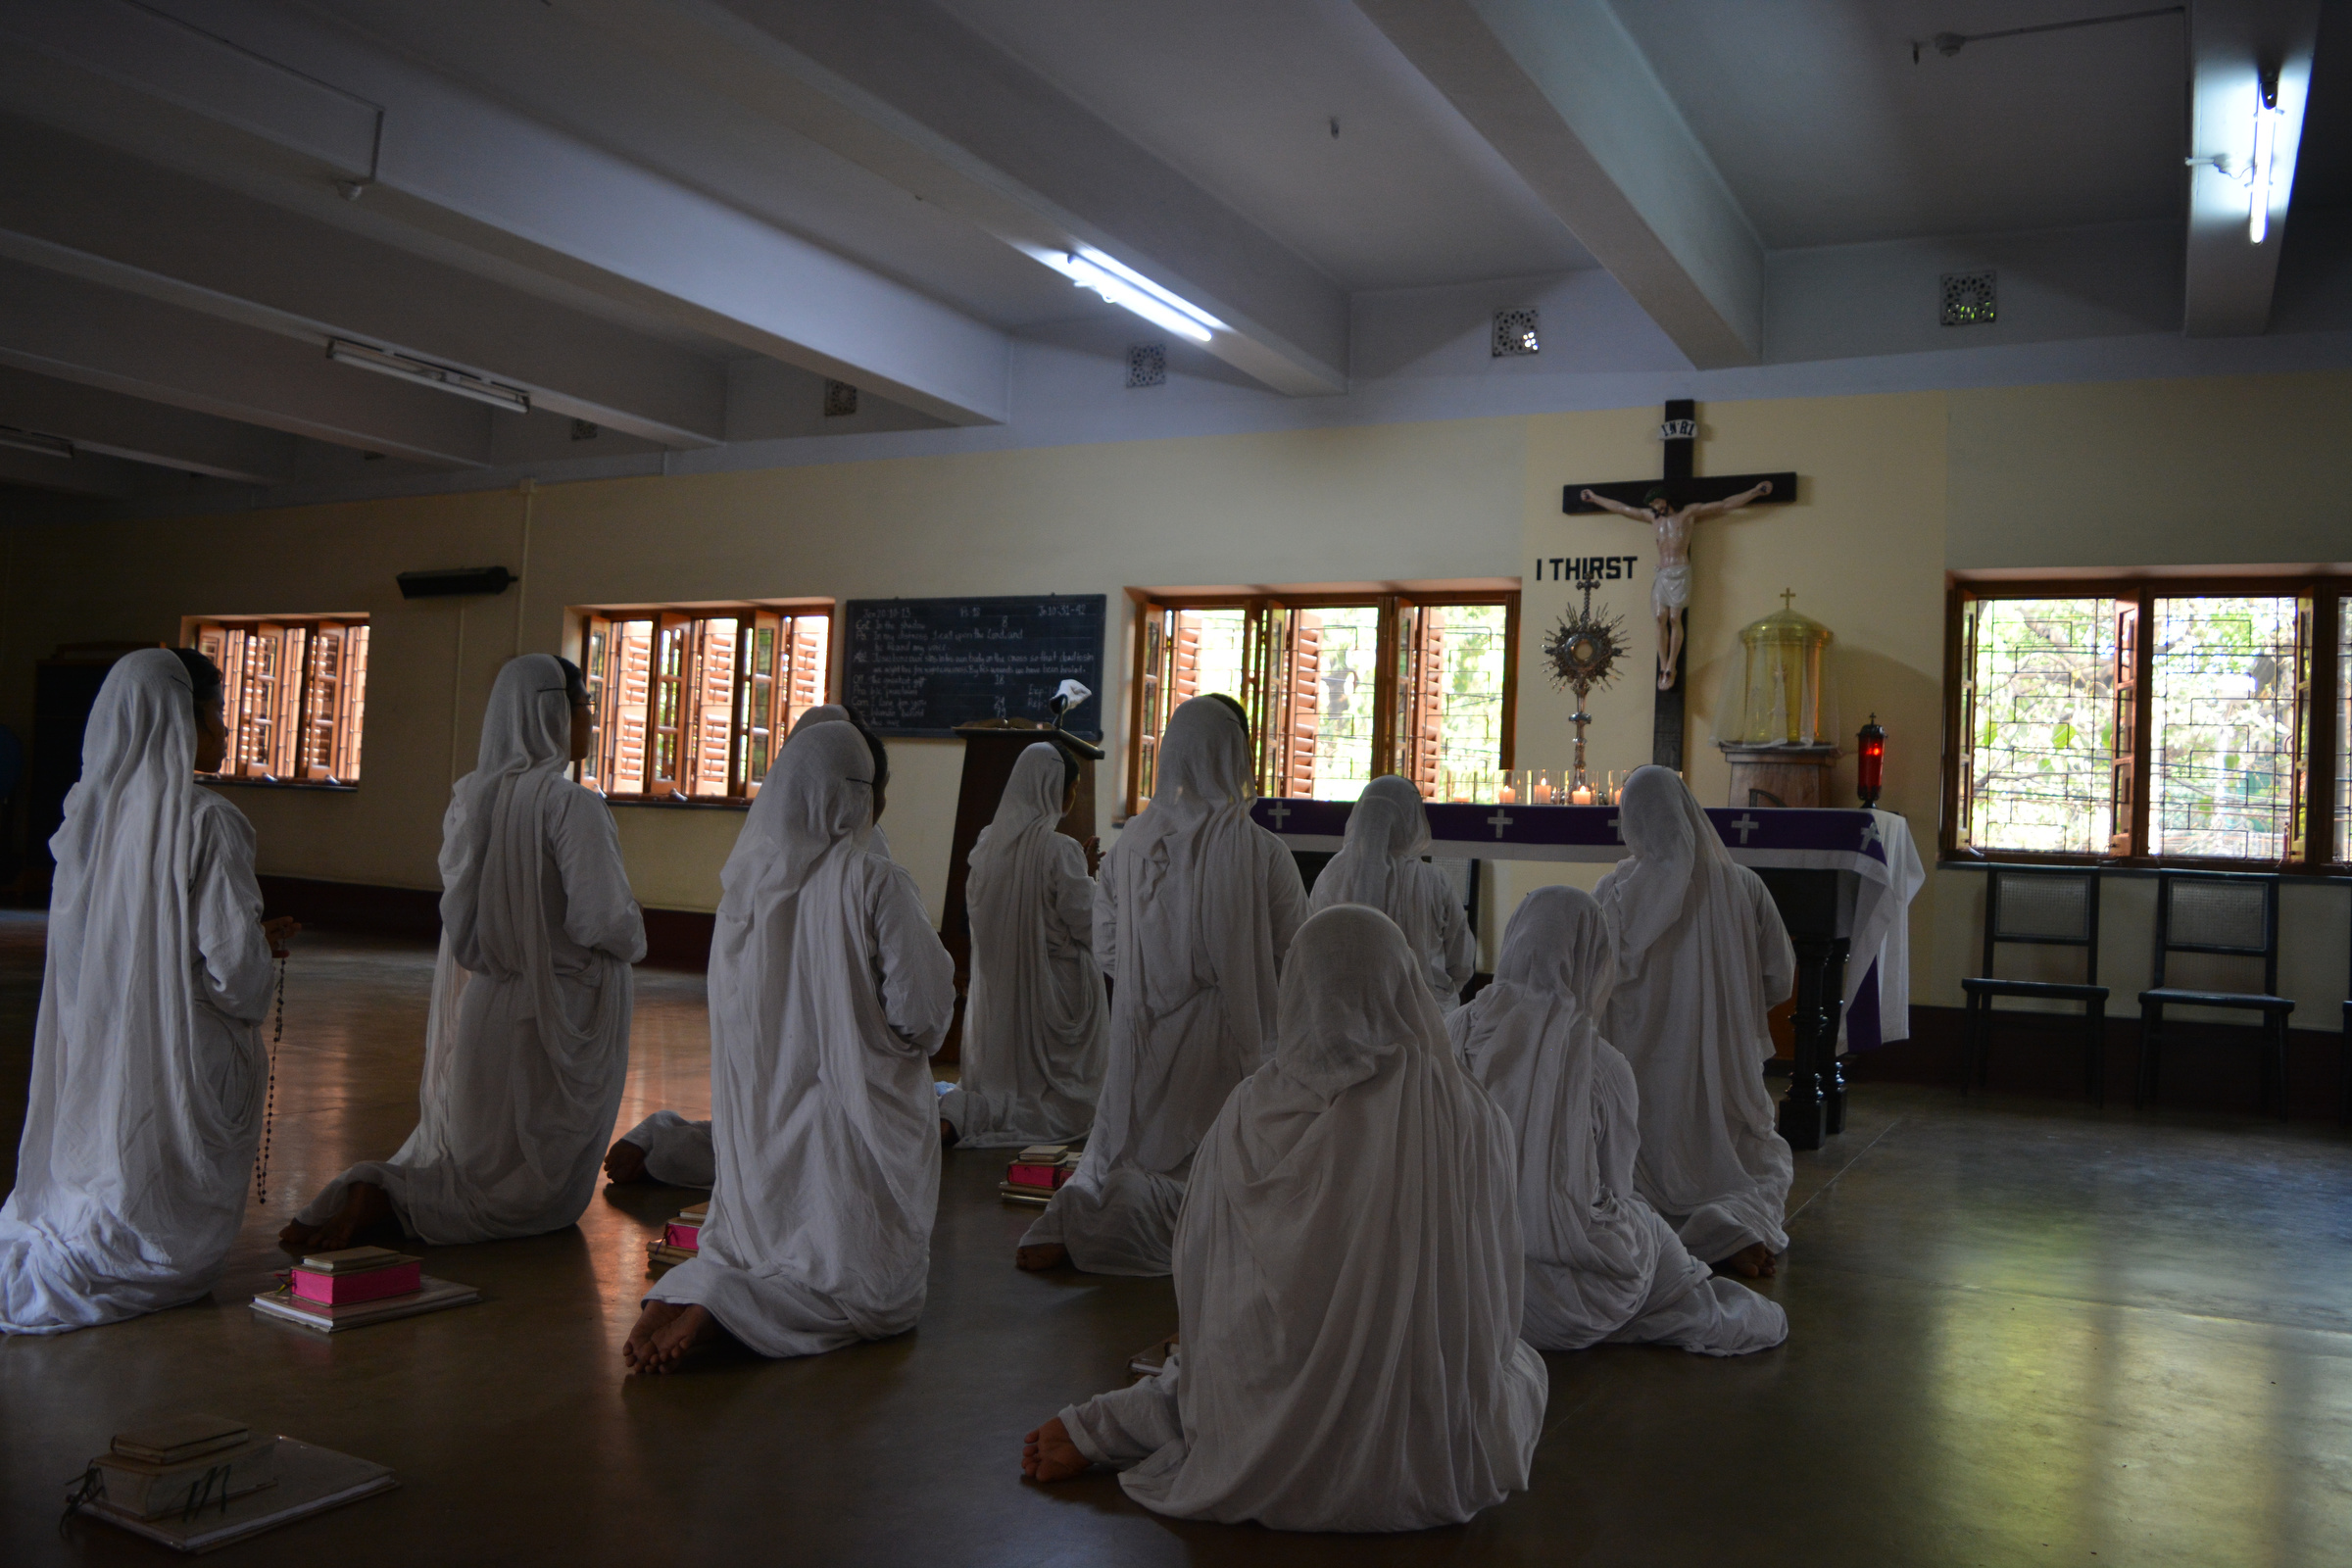 Nuns pray in Kolkata, India, Aug. 4. Although the Sept. 4 canonization of Blessed Teresa is in Rome, special festivities to honor her will continue in Kolkata until Christmas. (CNS photo/Saadia Azim)